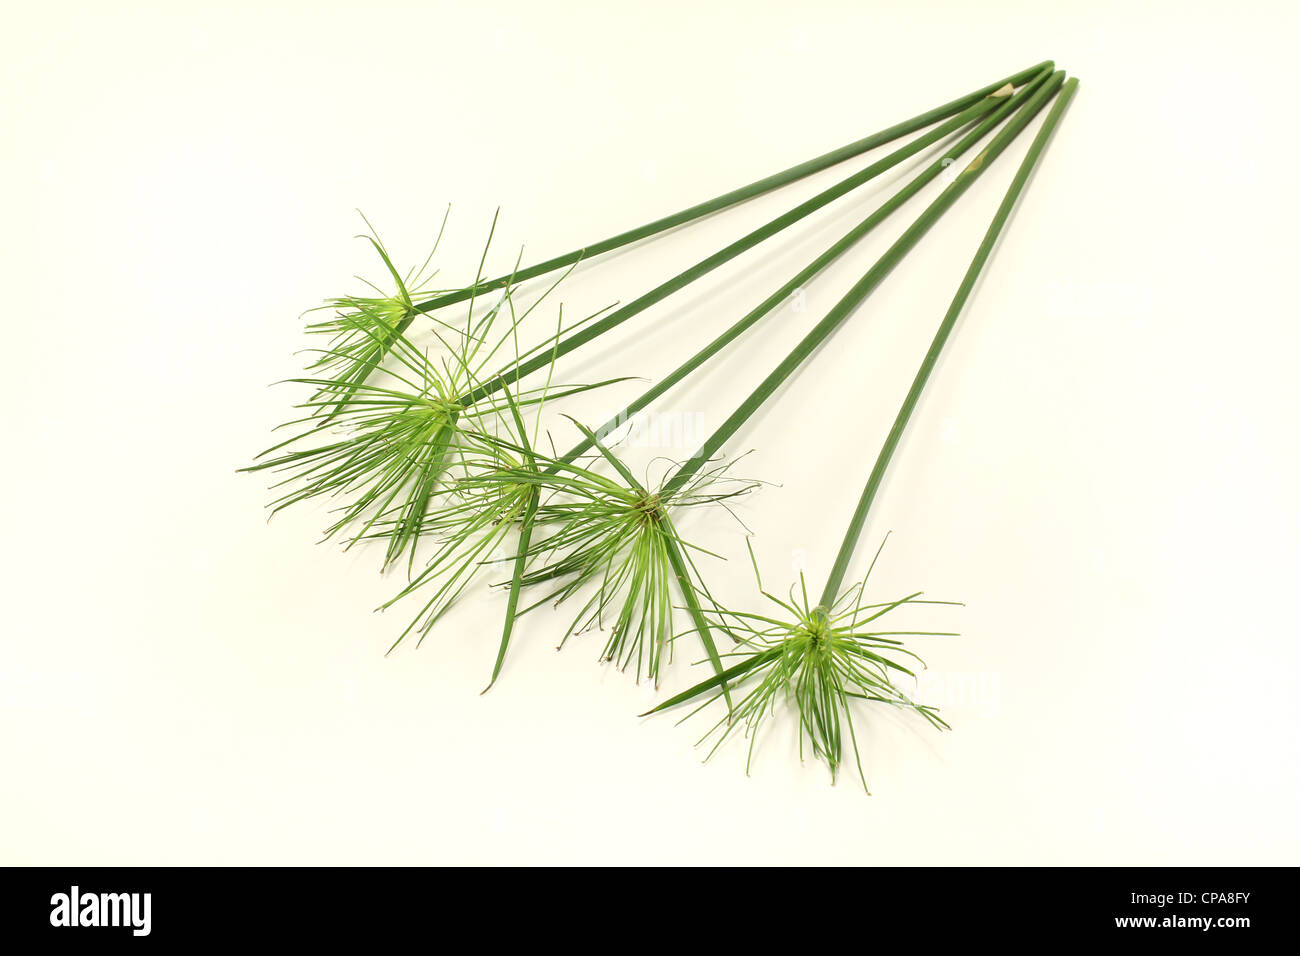 five fresh green stems papyrus plants on a light background Stock Photo